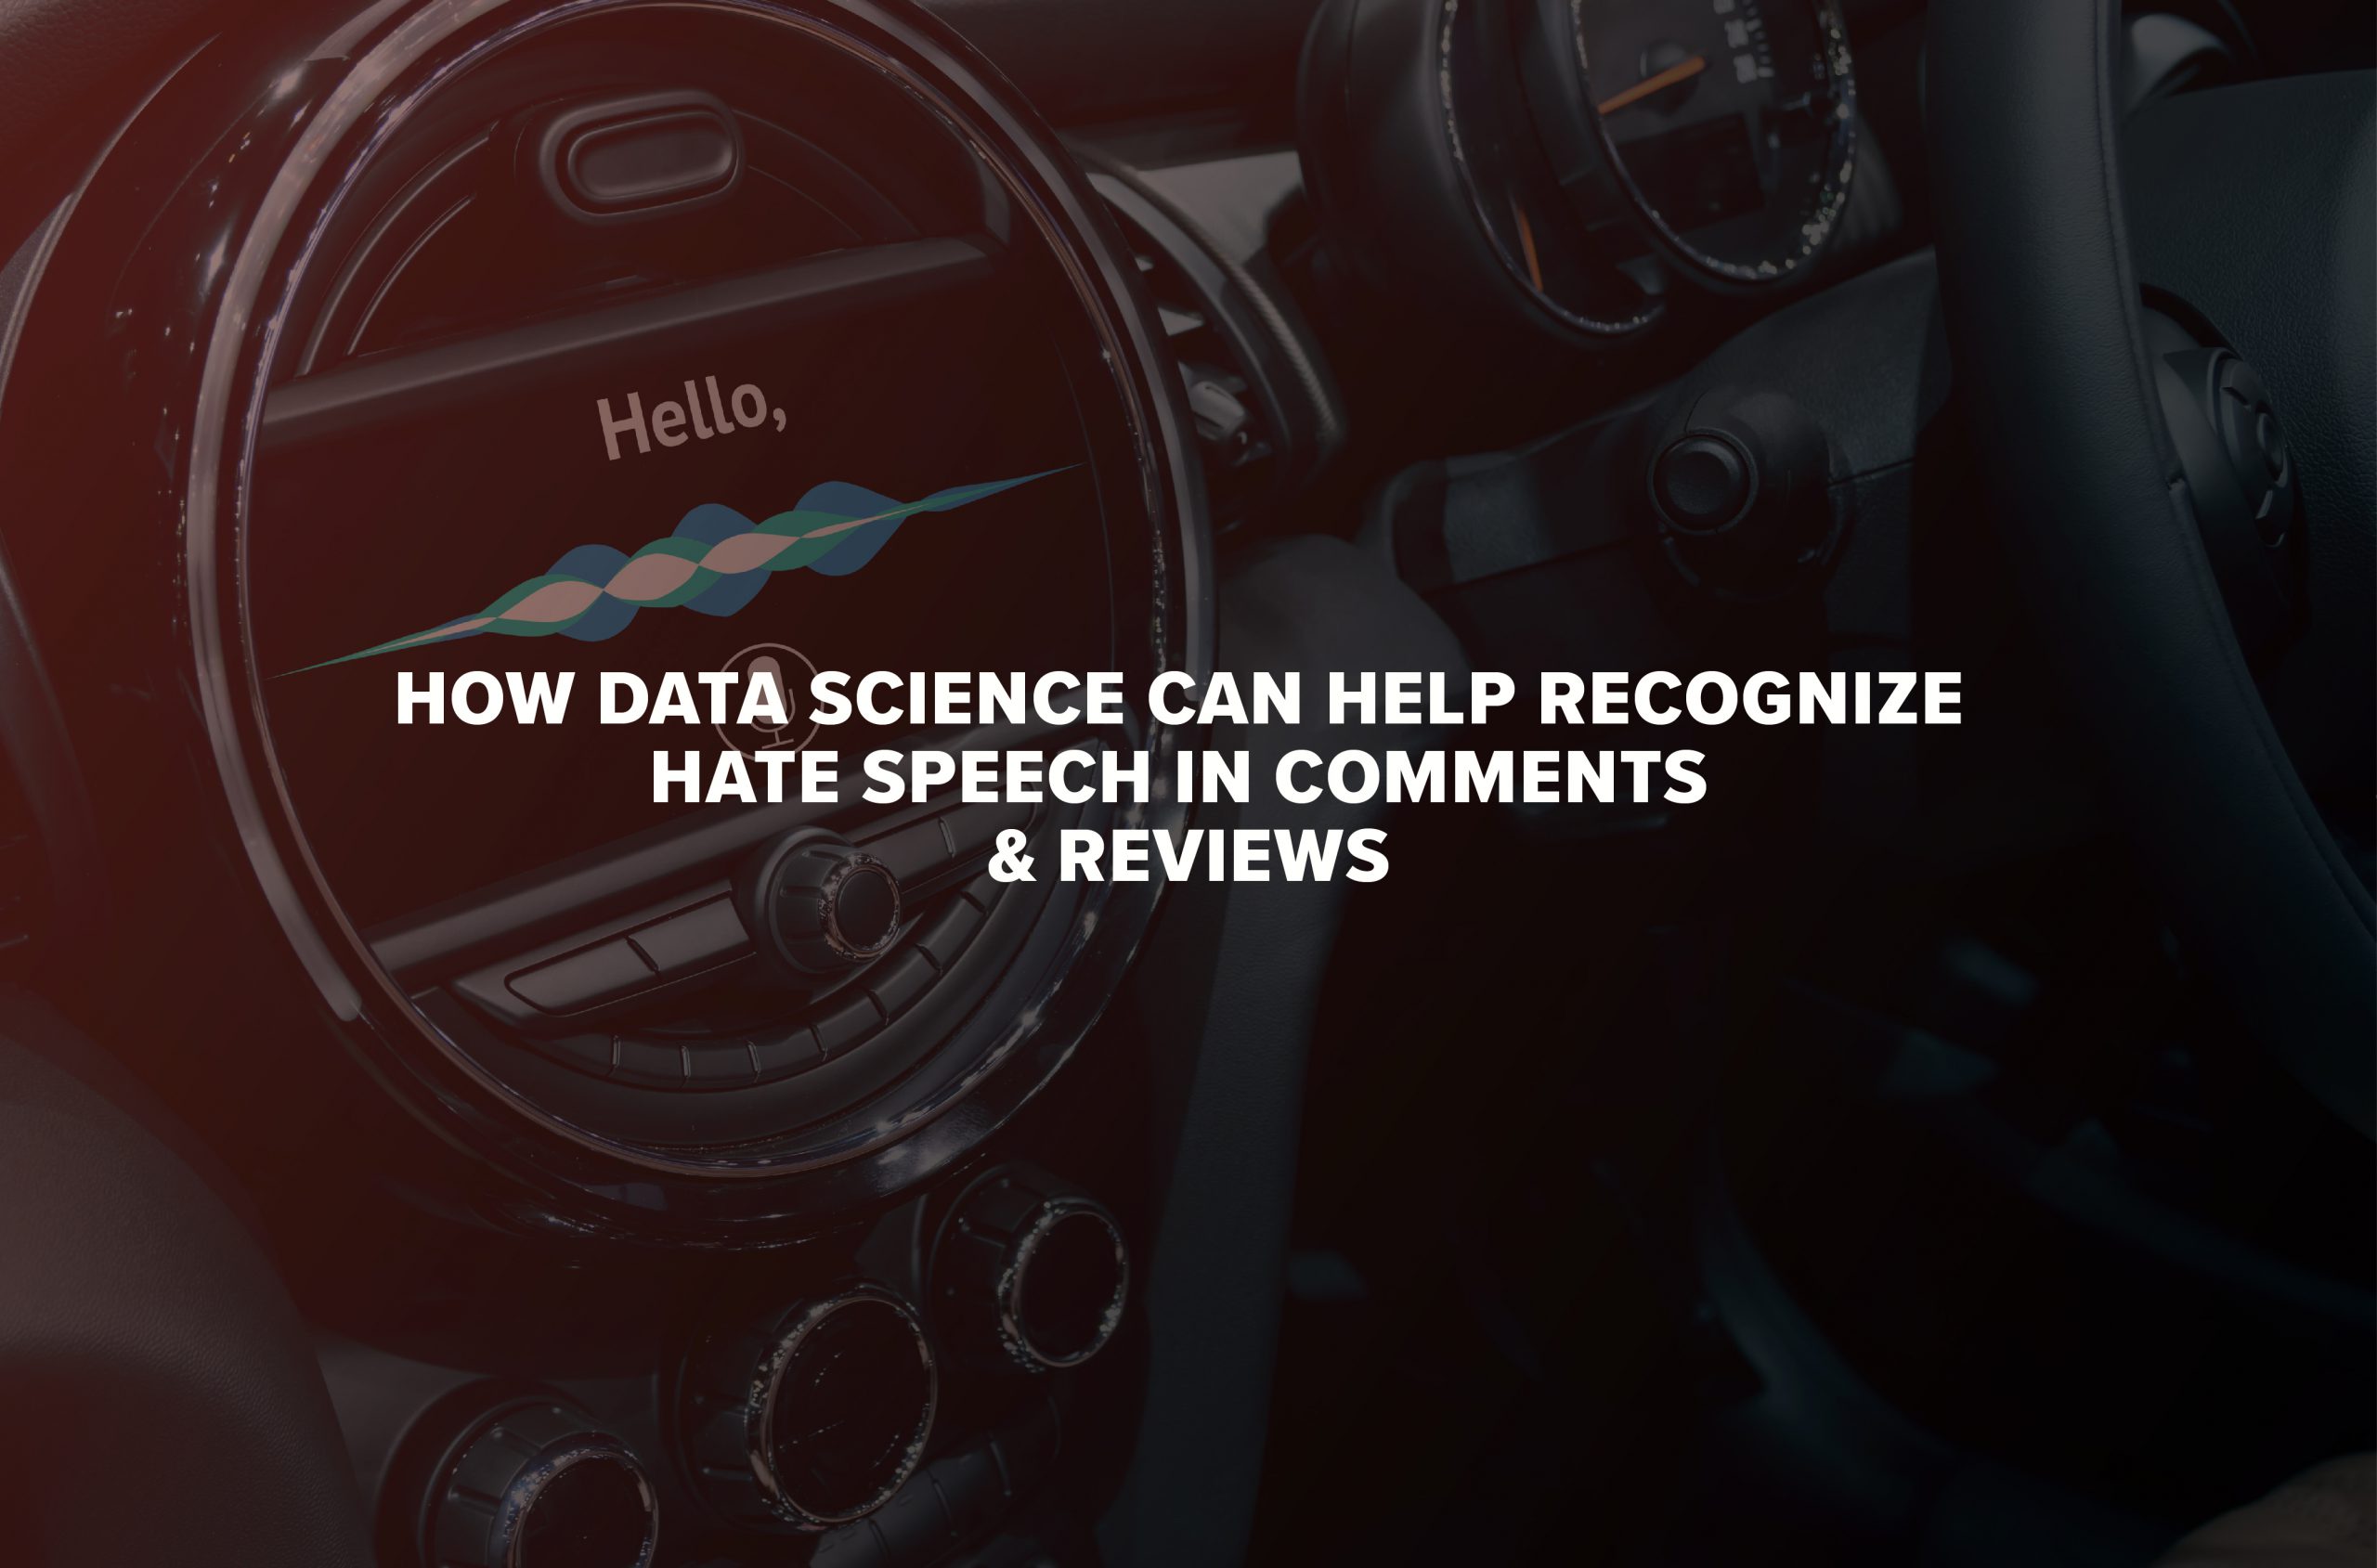 How Data Science Can Help Recognize Hate Speech in Comments & Reviews